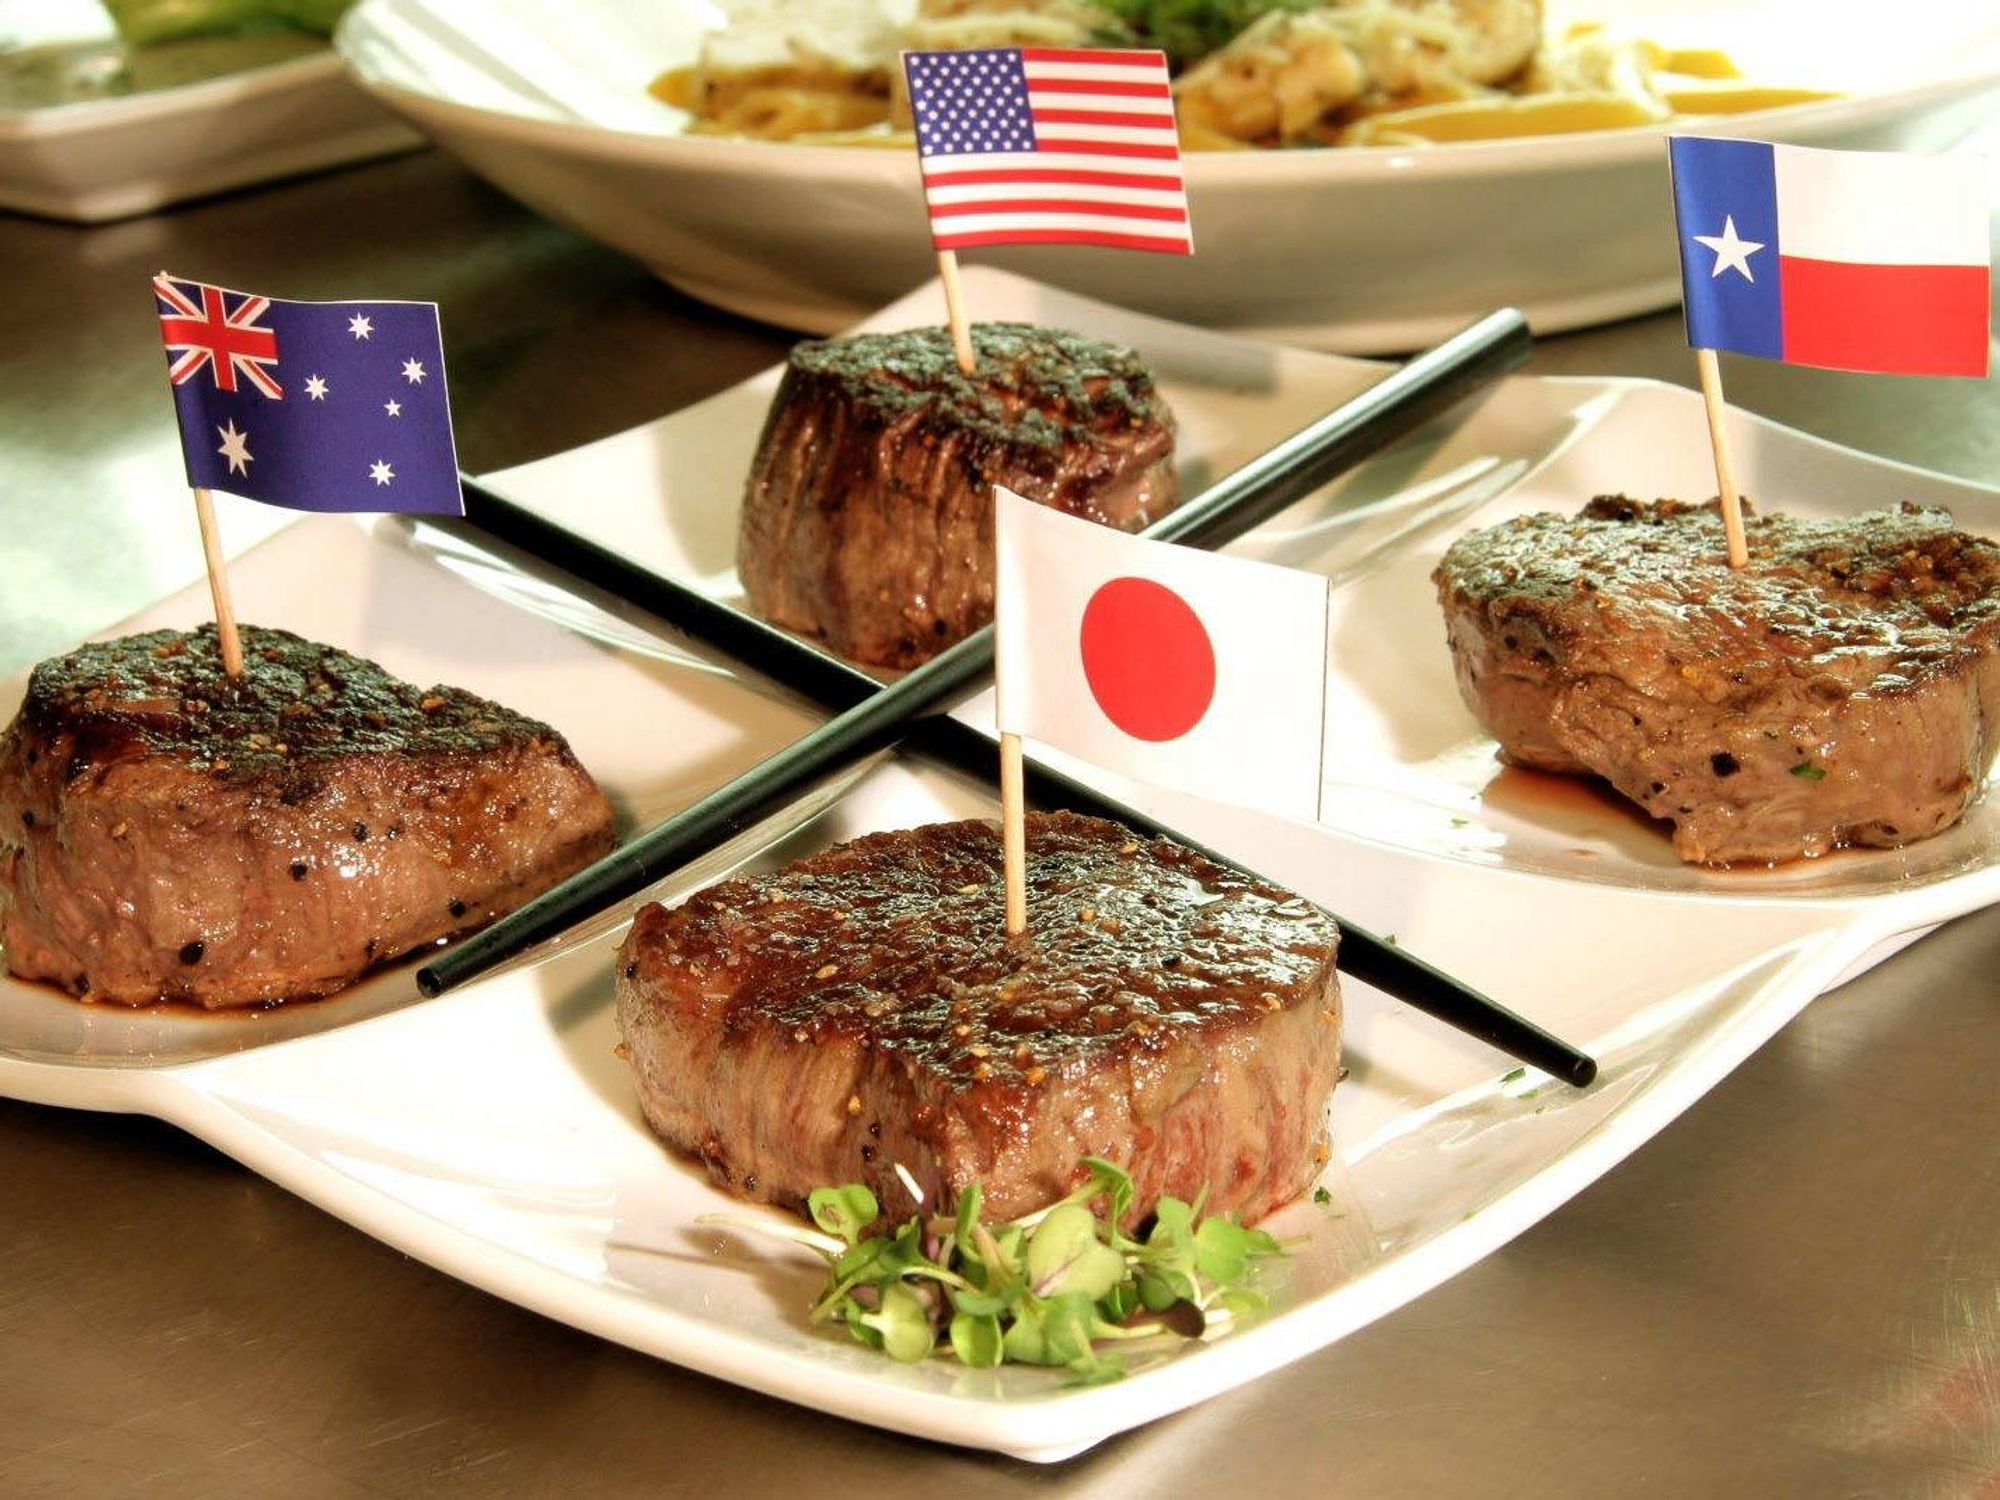 Killen's Steakhouse Kobe beef with flags